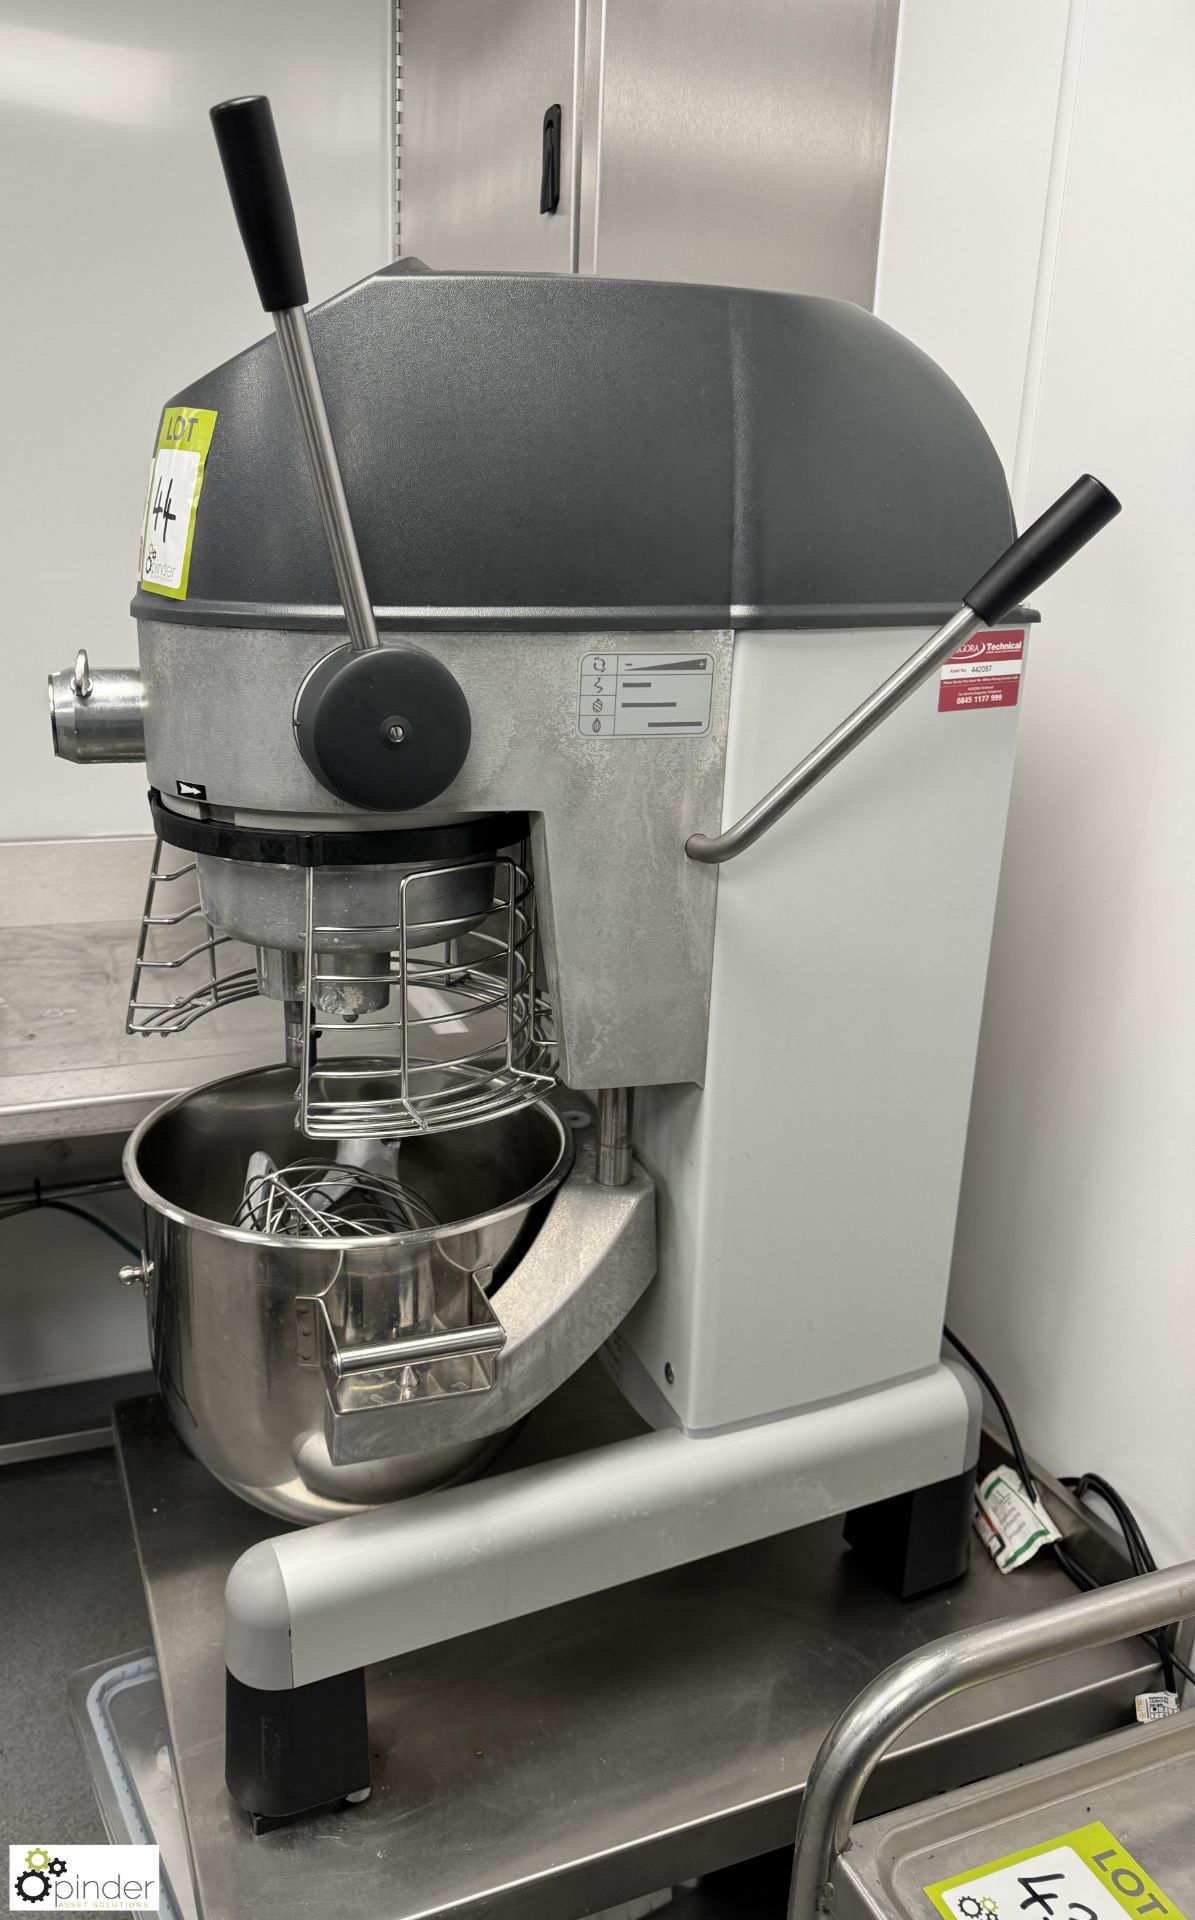 Electrolux XBM20 Commercial Food Mixer, 20litres, 240volts, with whisk, mixing paddle, bowl and - Image 6 of 7